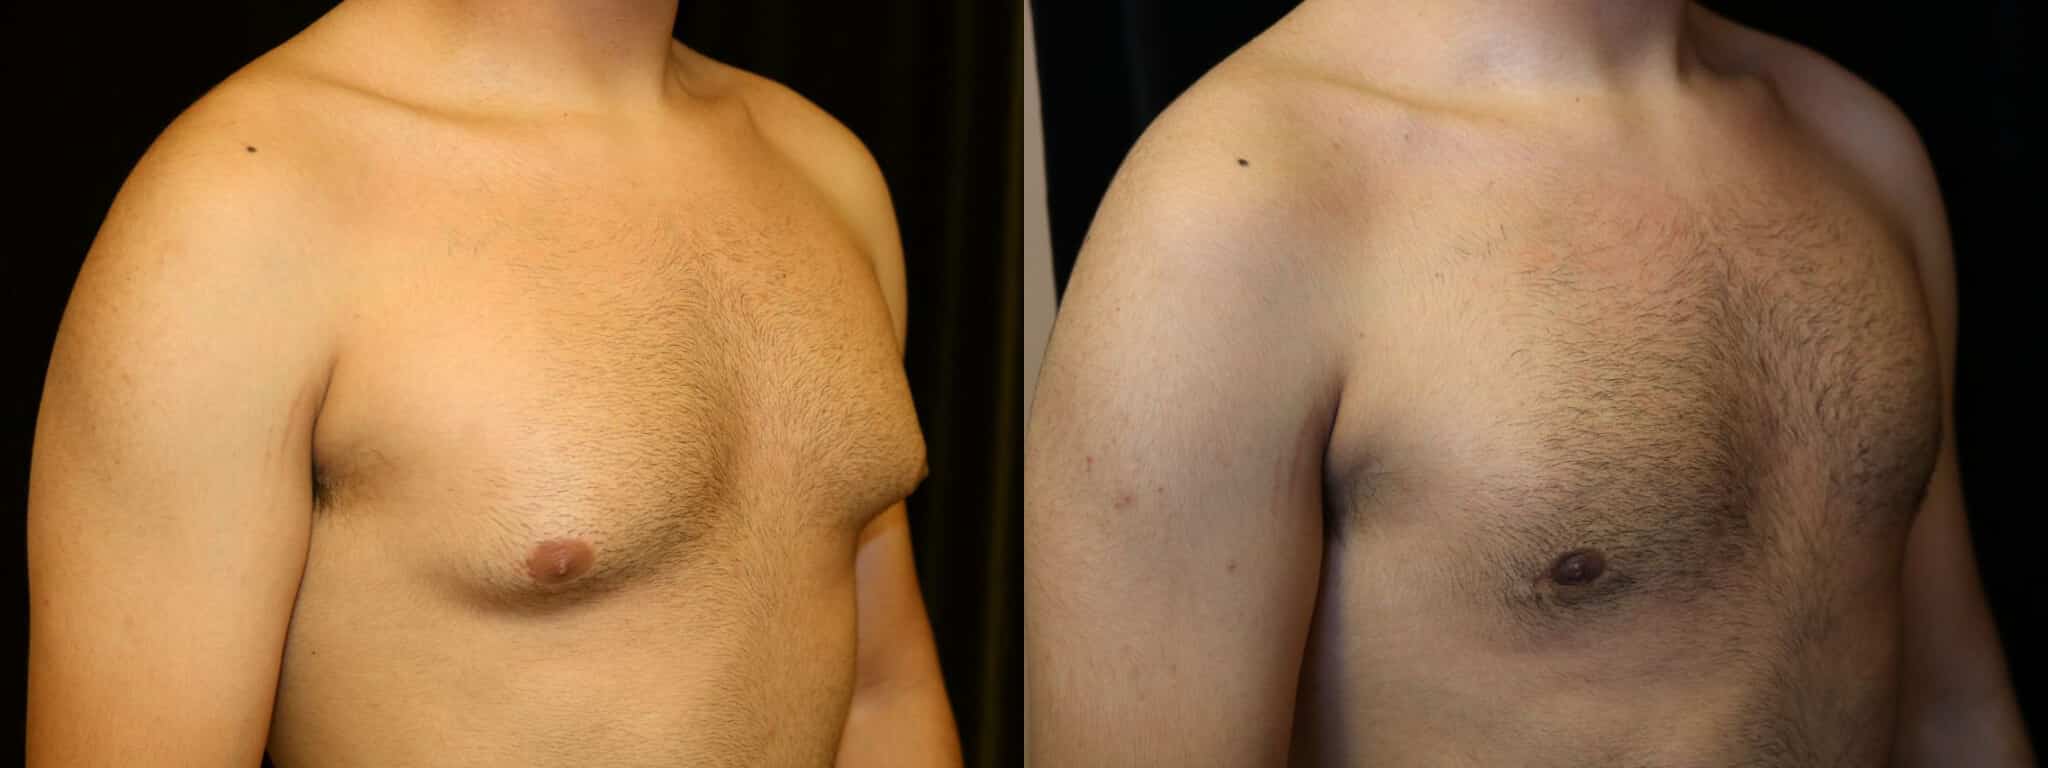 Gynecomastia Patient 13 Before & After Details